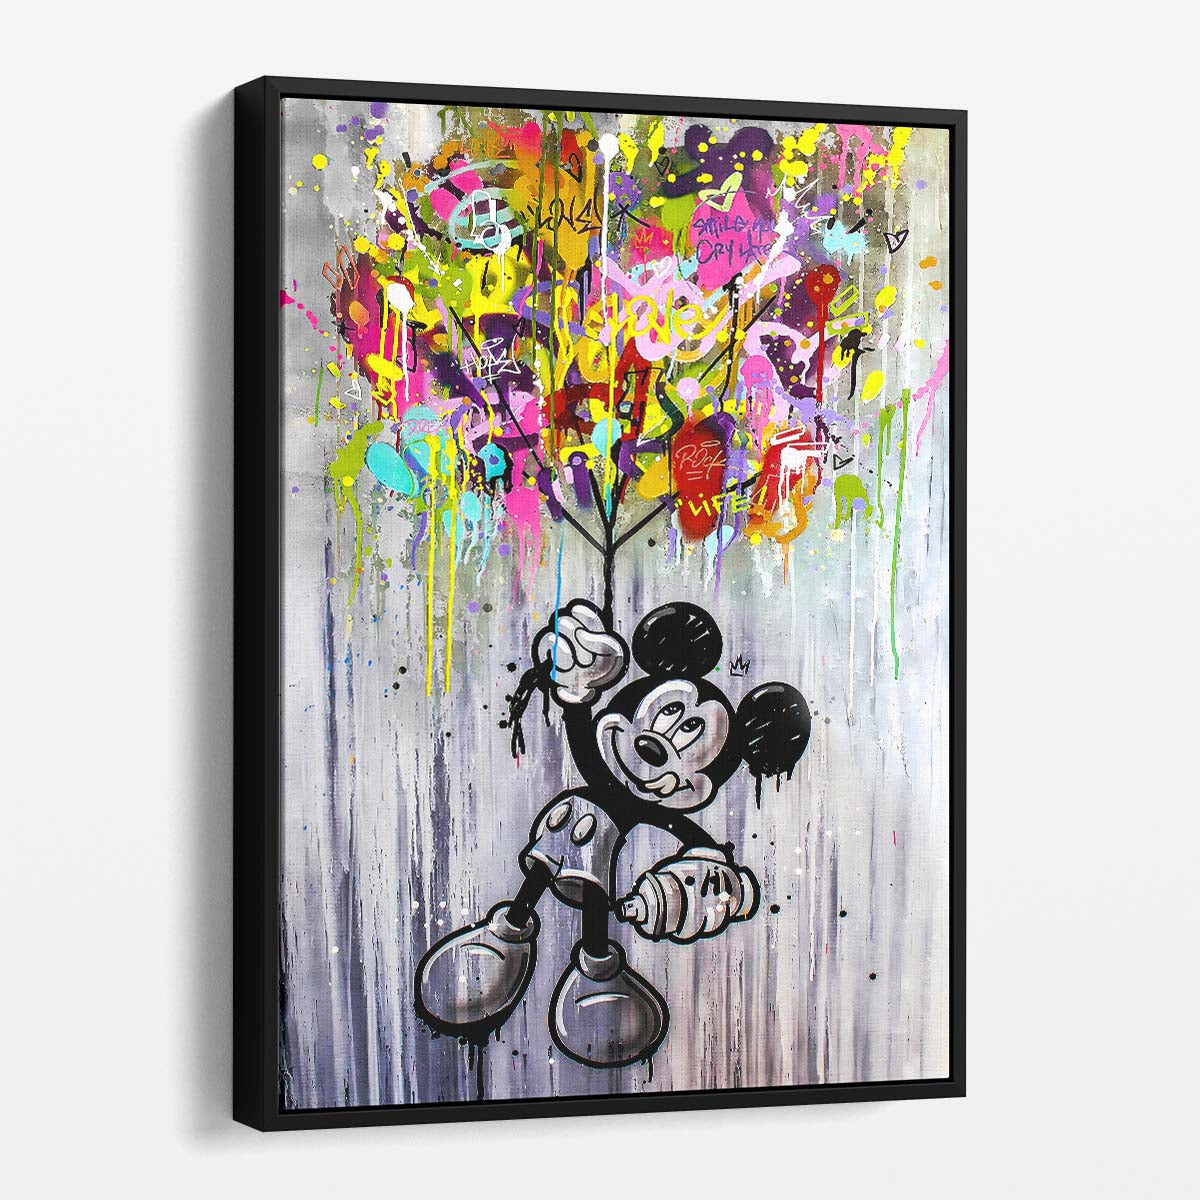 Mickey Mouse Holding Balloons Graffiti Wall Art by Luxuriance Designs. Made in USA.